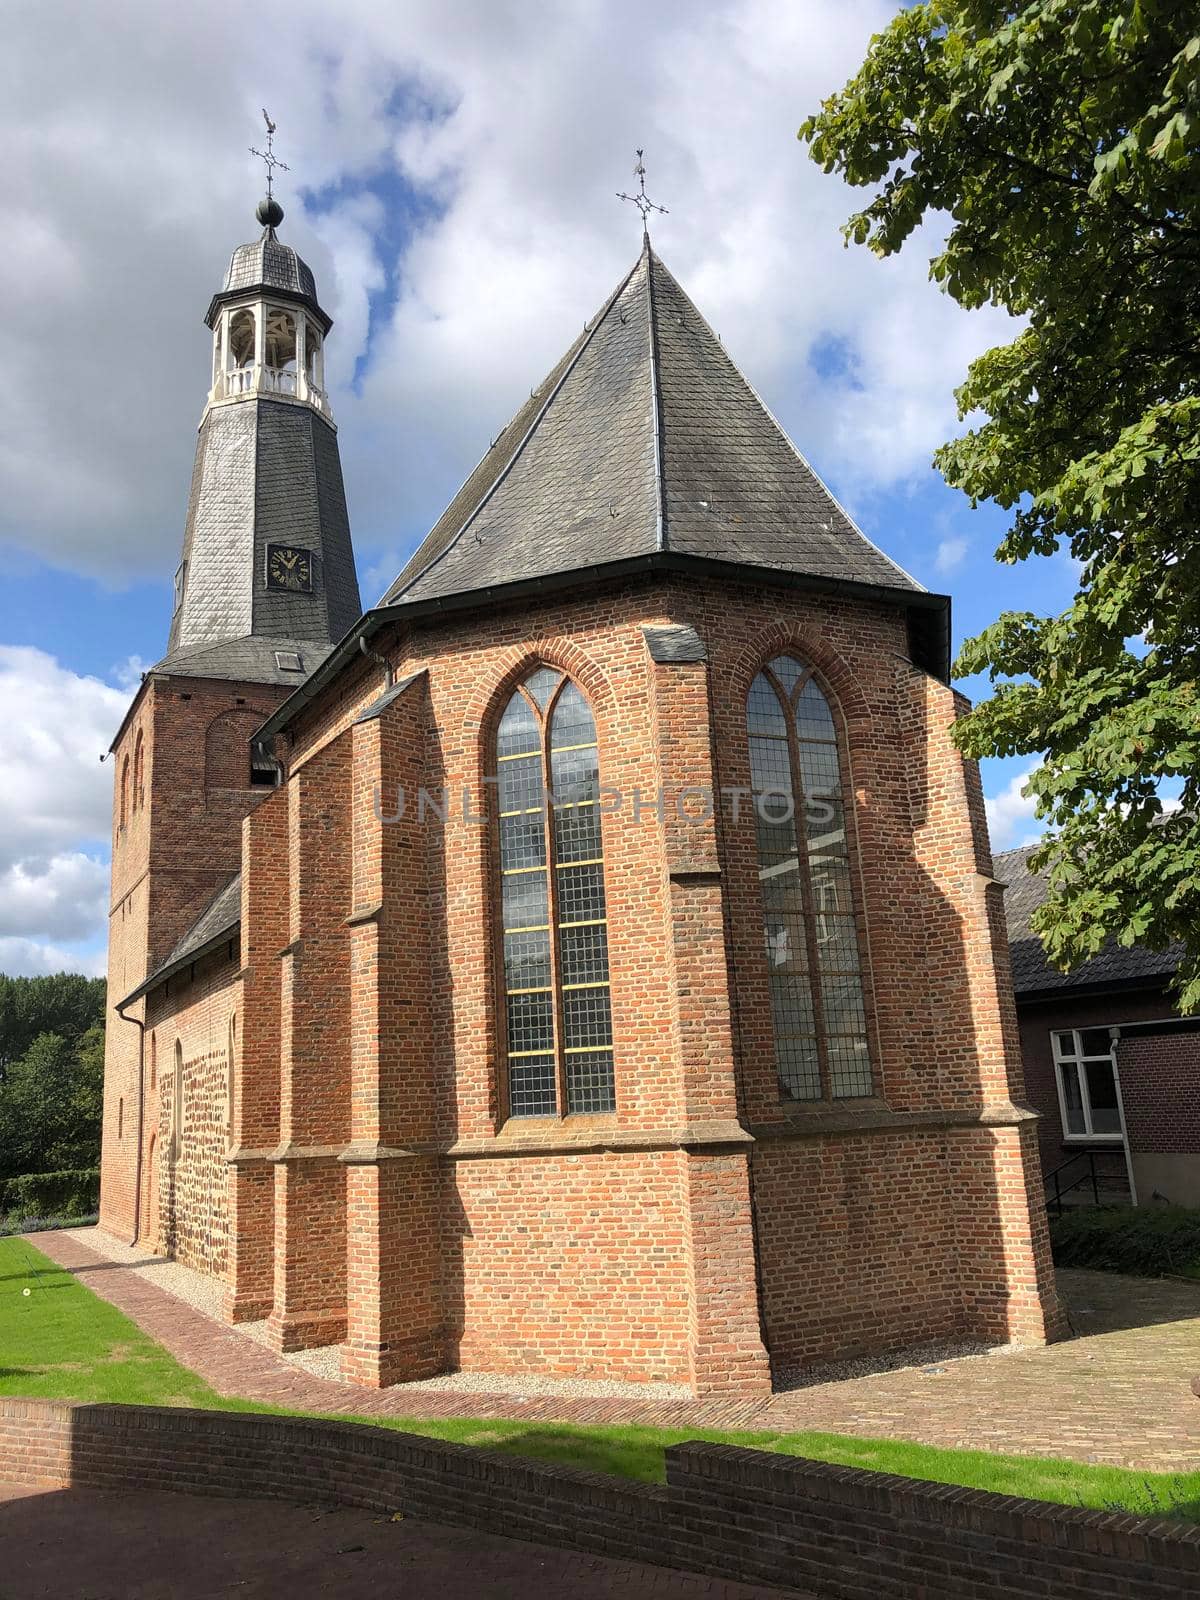 Old holy saint mauritius church in Silvolde, The Netherlands